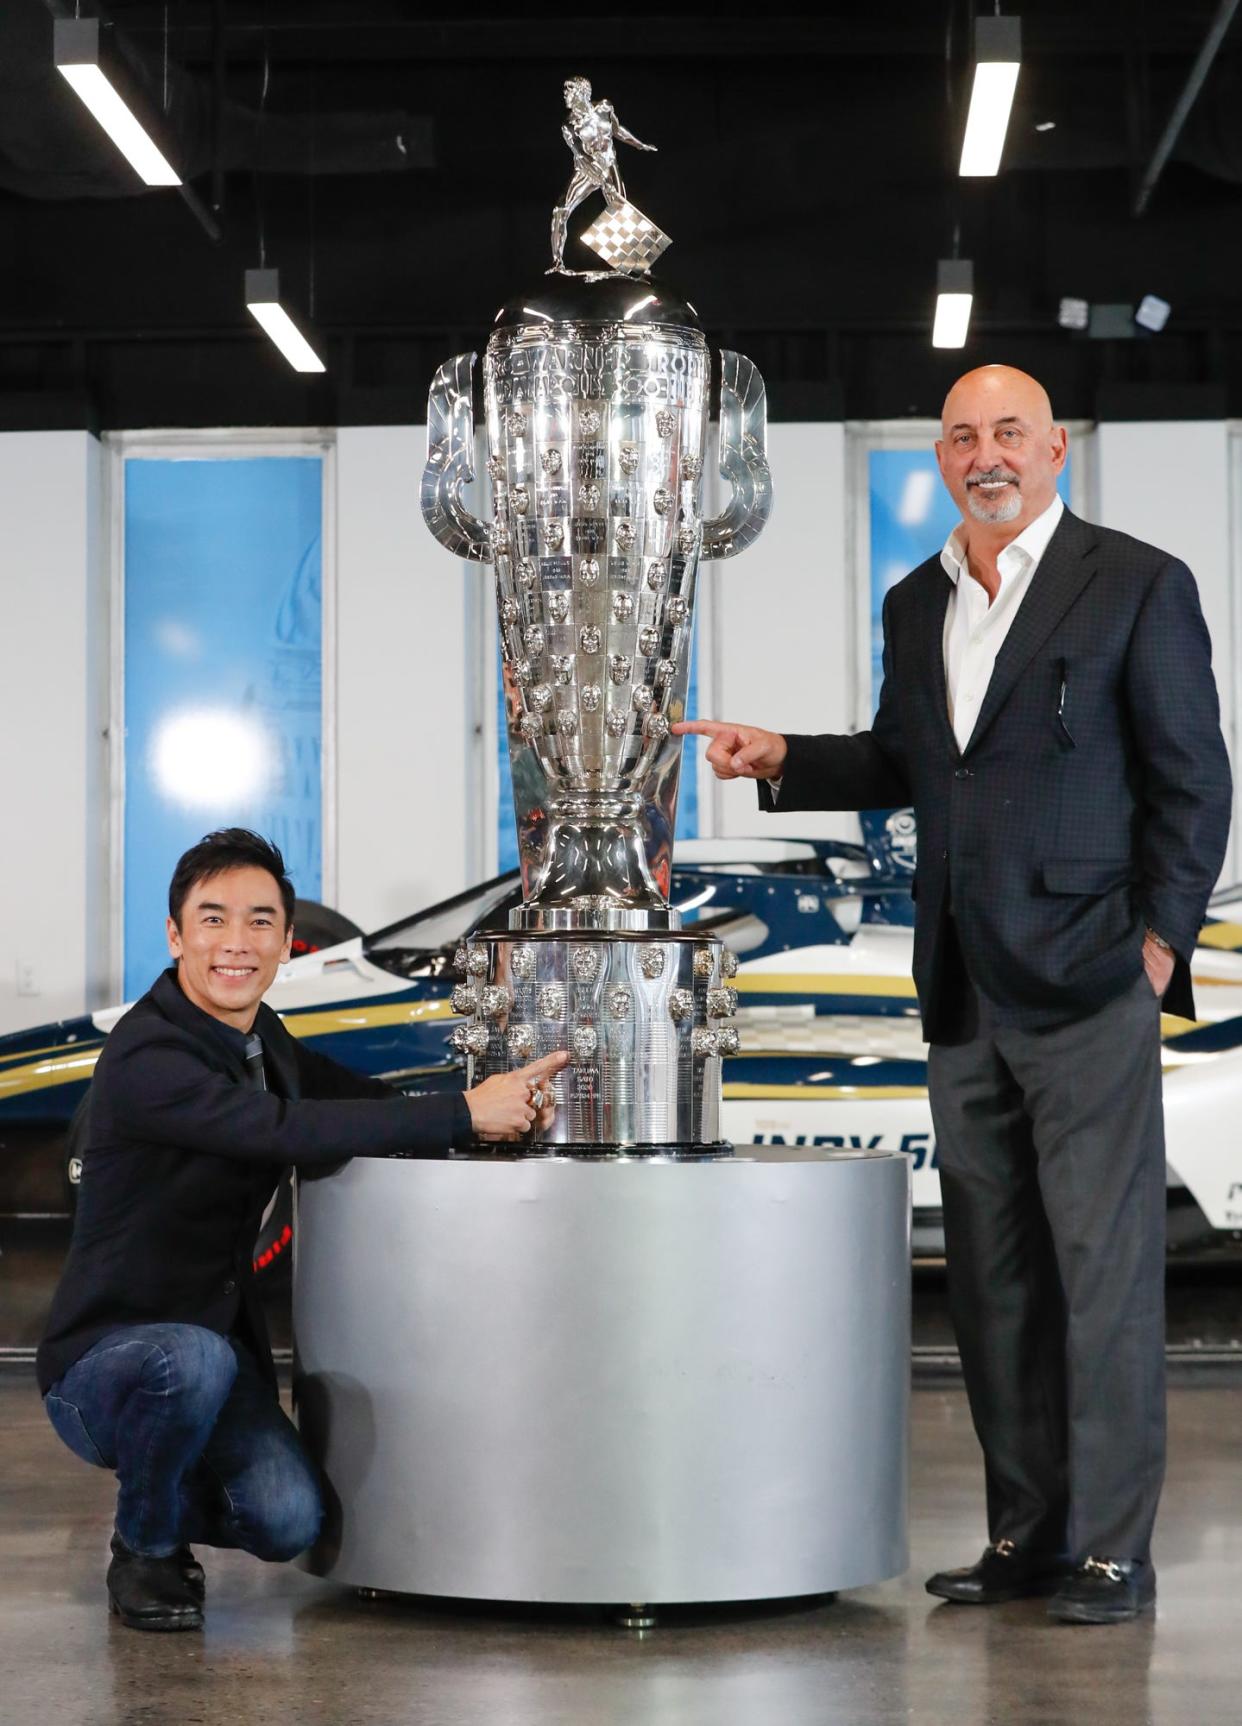 Two time Indy 500 winner, Takuma Sato (left) and Rahal Letterman Lanigan team owner and fellow Indy 500 winner Bobby Rahal are photographed with the Borg-Warner Trophy on Friday, February 19, 2021 at the Indianapolis Motor Speedway Museum. The trophy now features Sato's face twice. 